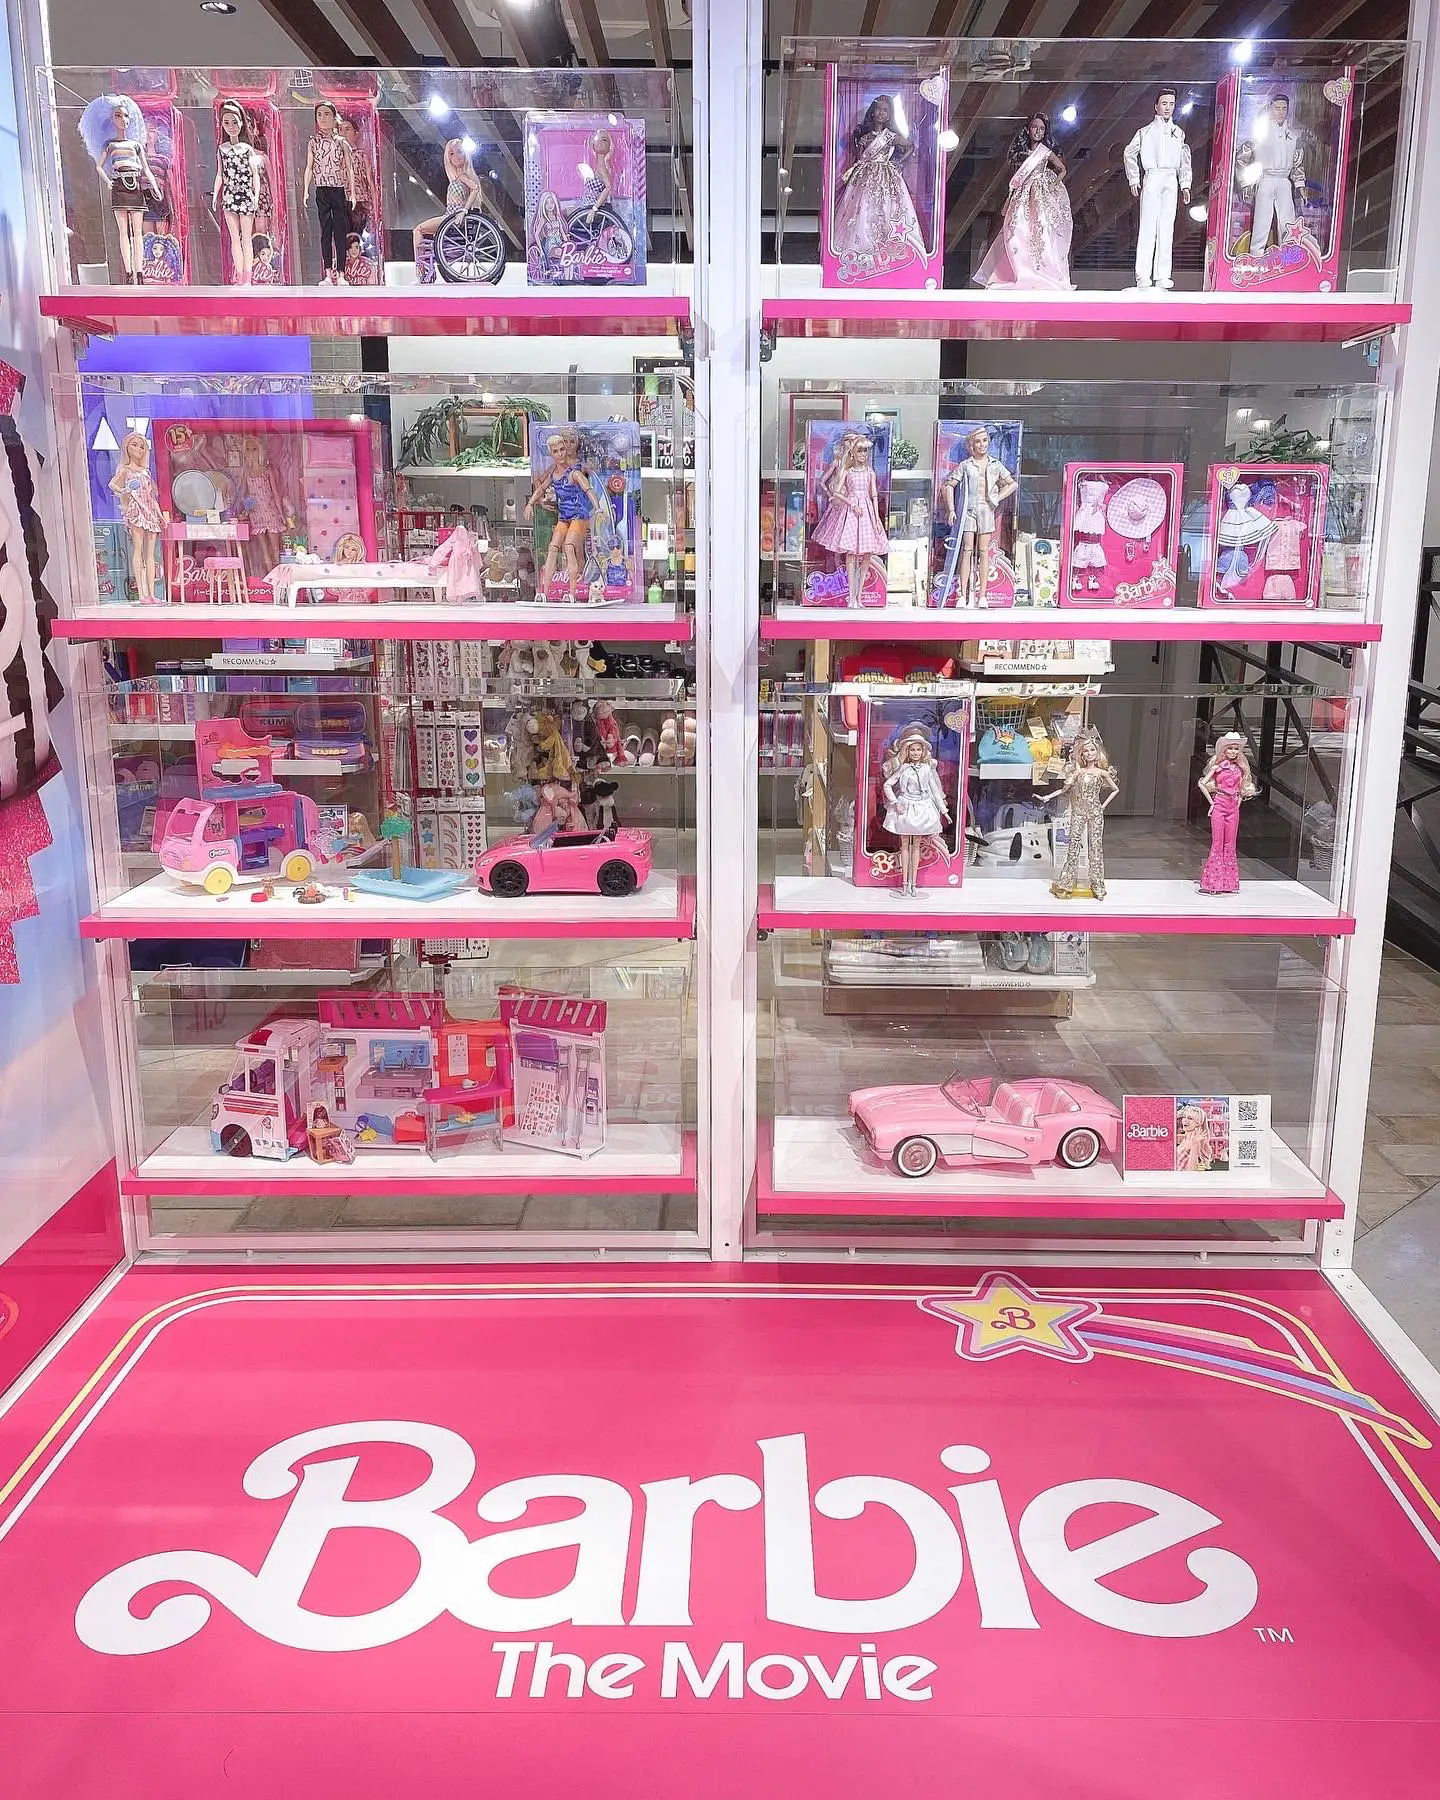 Limited Time 】 A photo spot that is too cute ⁉️ become a Barbie 